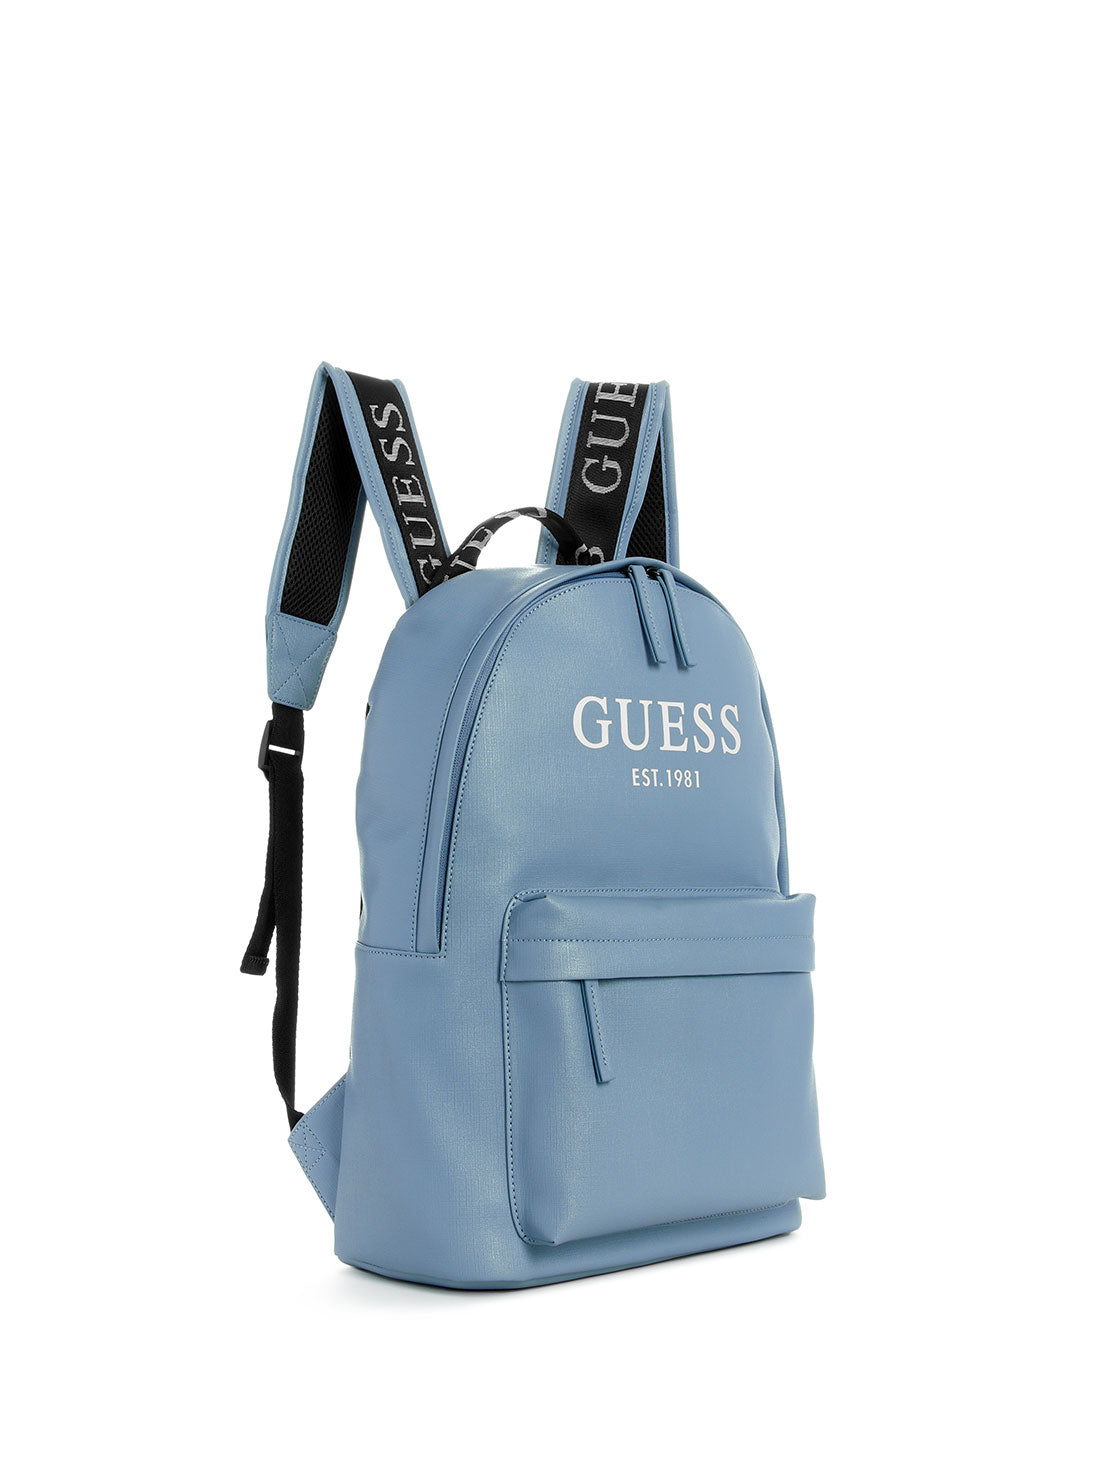 GUESS Blue Logo Outfitter Backpack side view